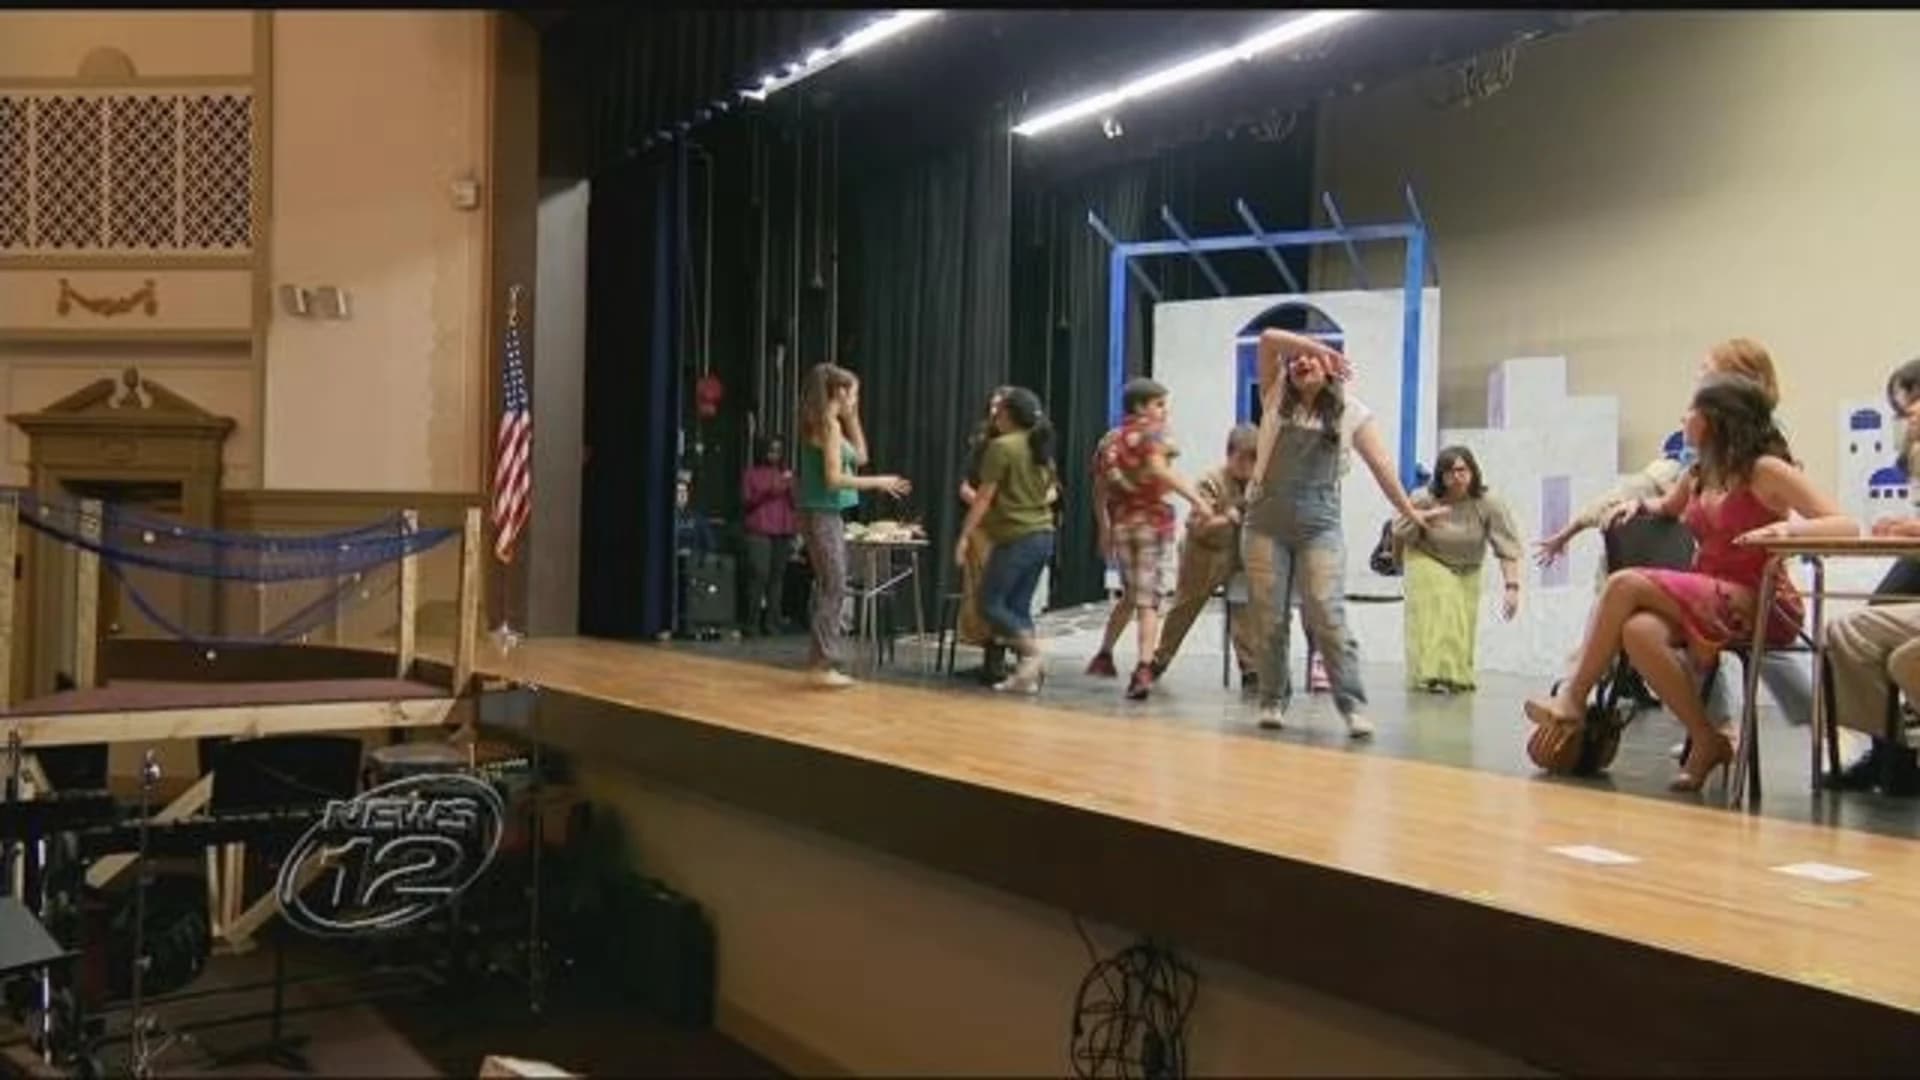 Here they go: Port Chester HS students to perform ‘Mamma Mia’